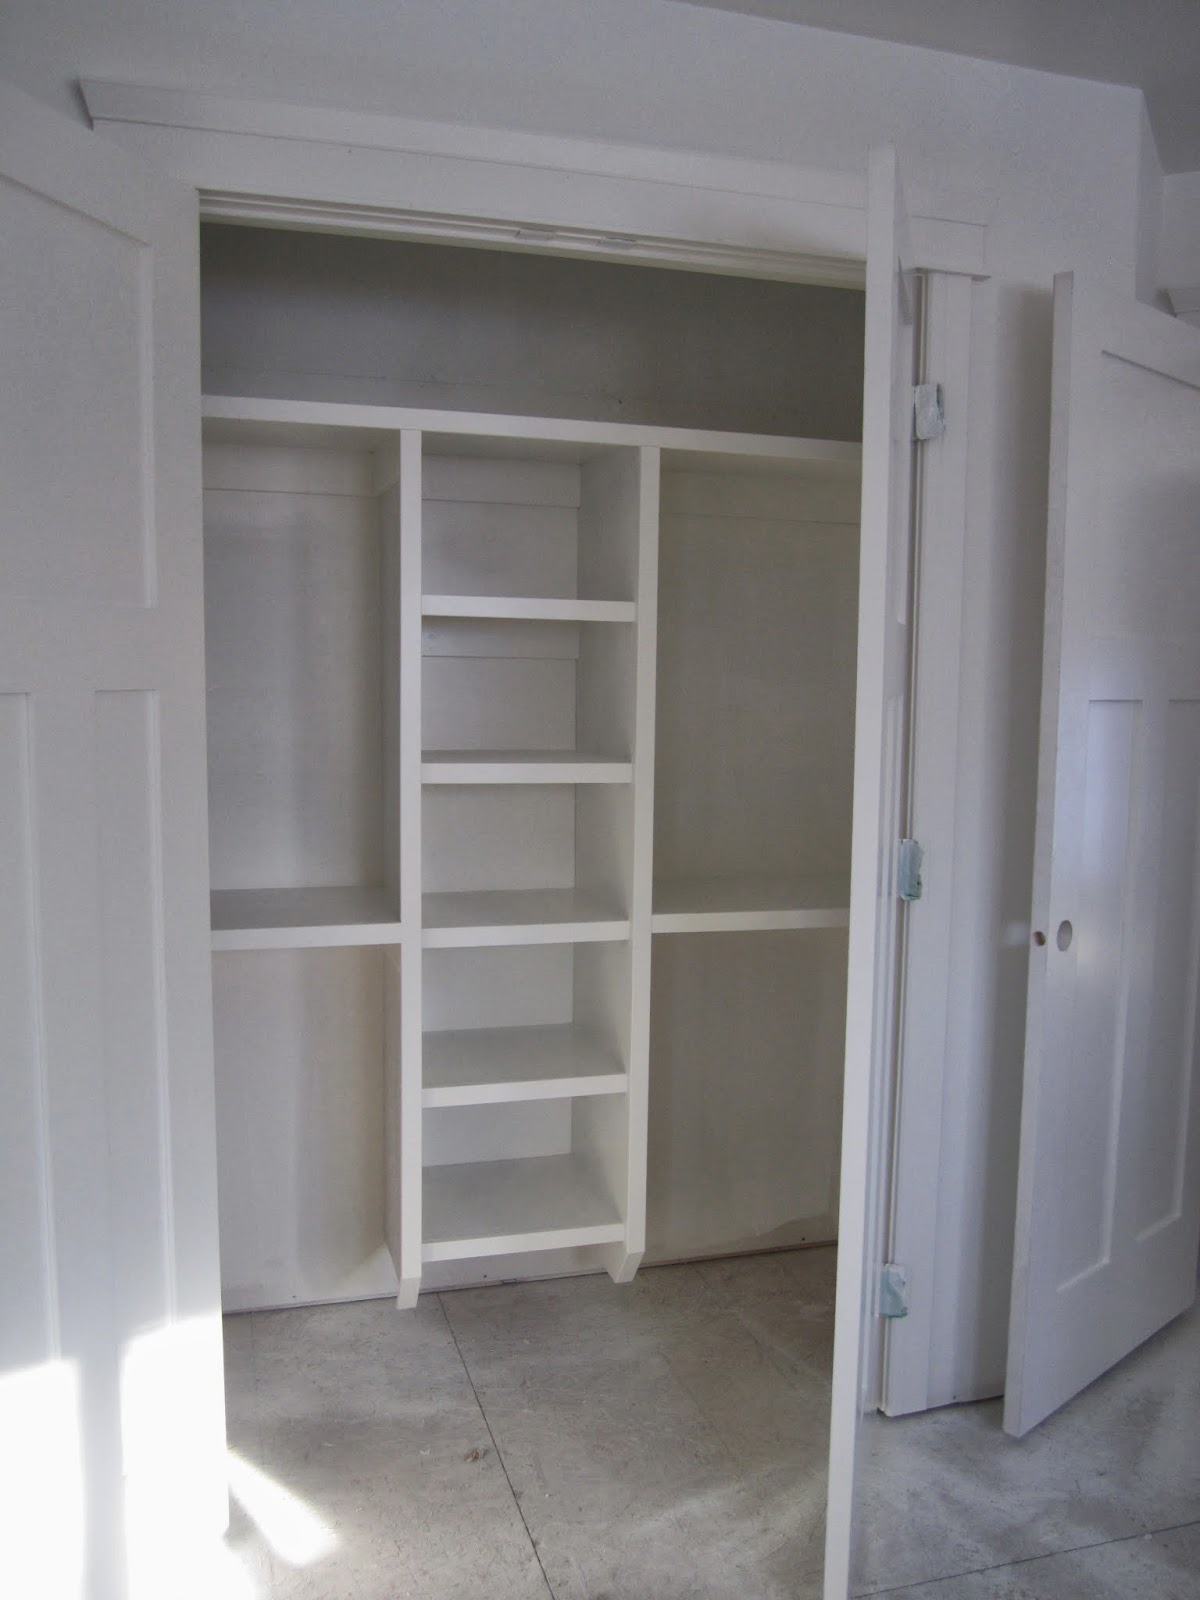 Building an infill in Westmount: Shelves, Trim and Paint 